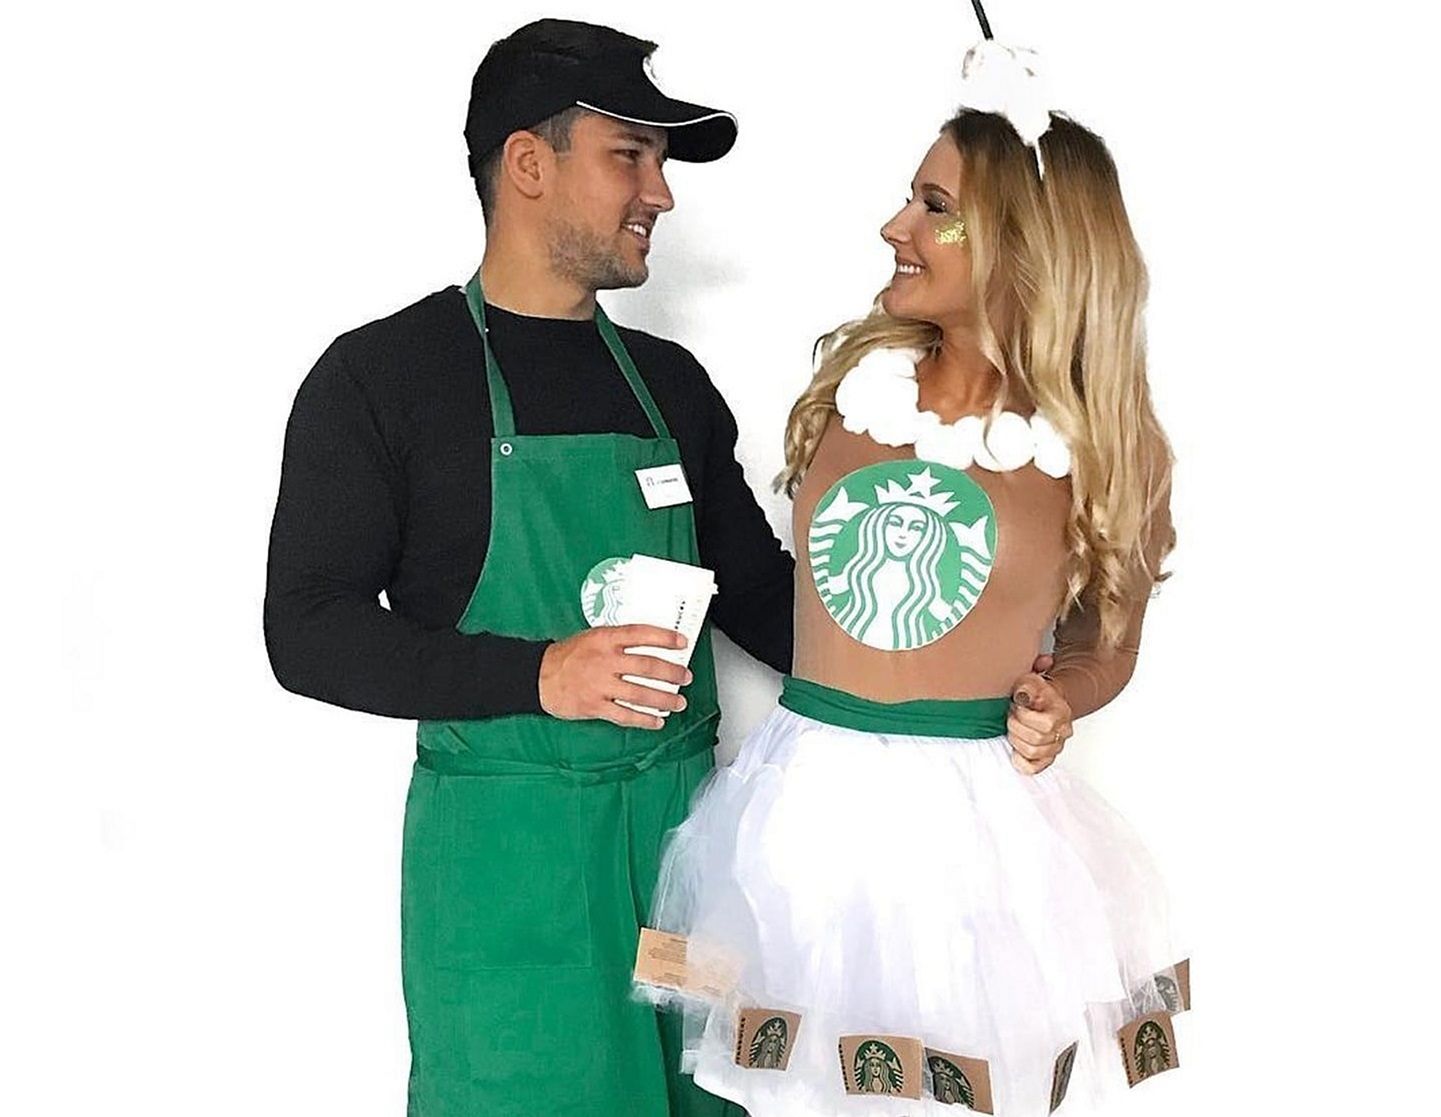 Halloween costumes for couples from weddingestates